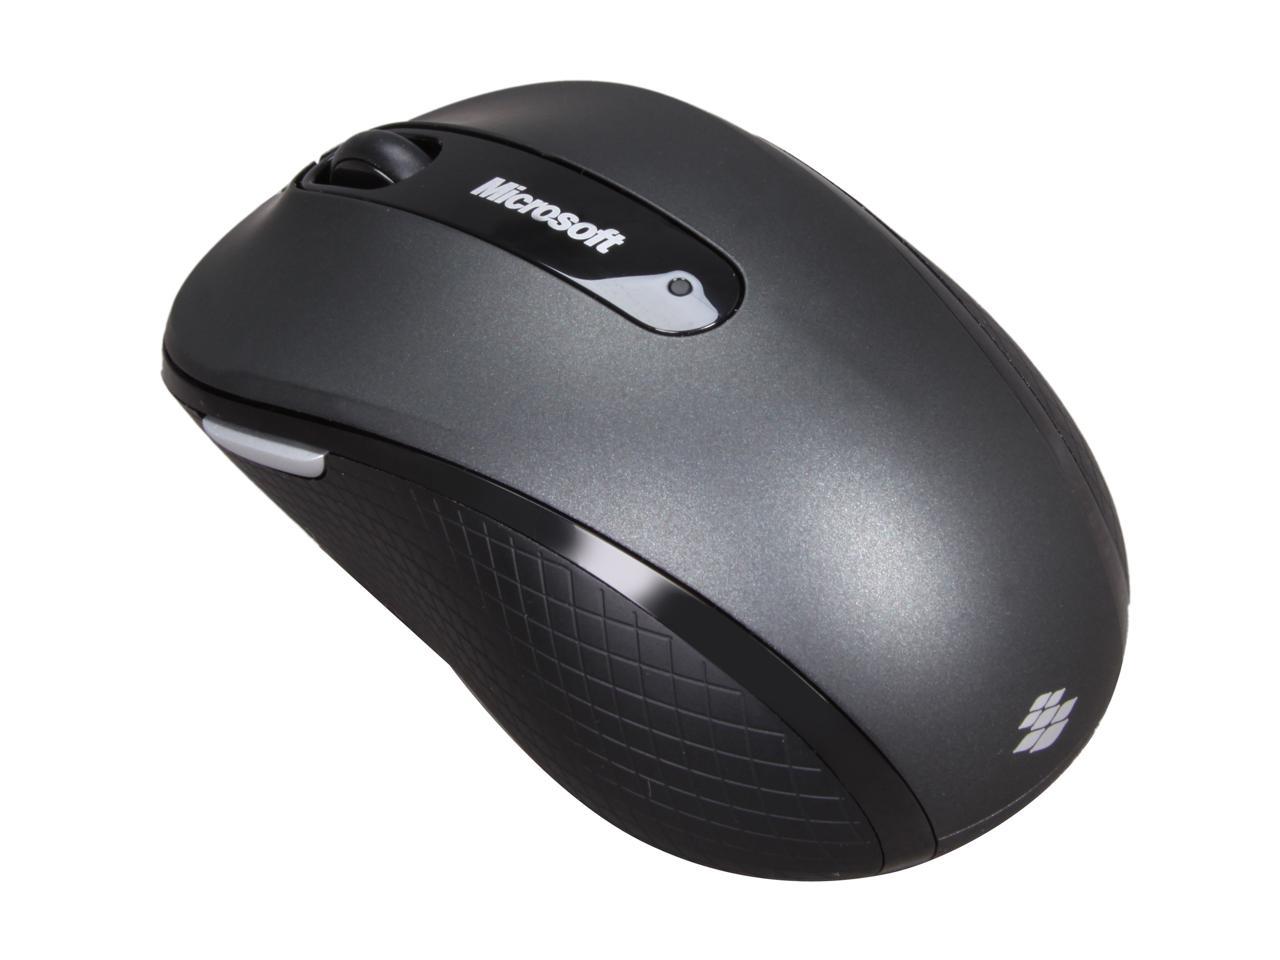 microsoft wireless mobile mouse 4000 driver for xp